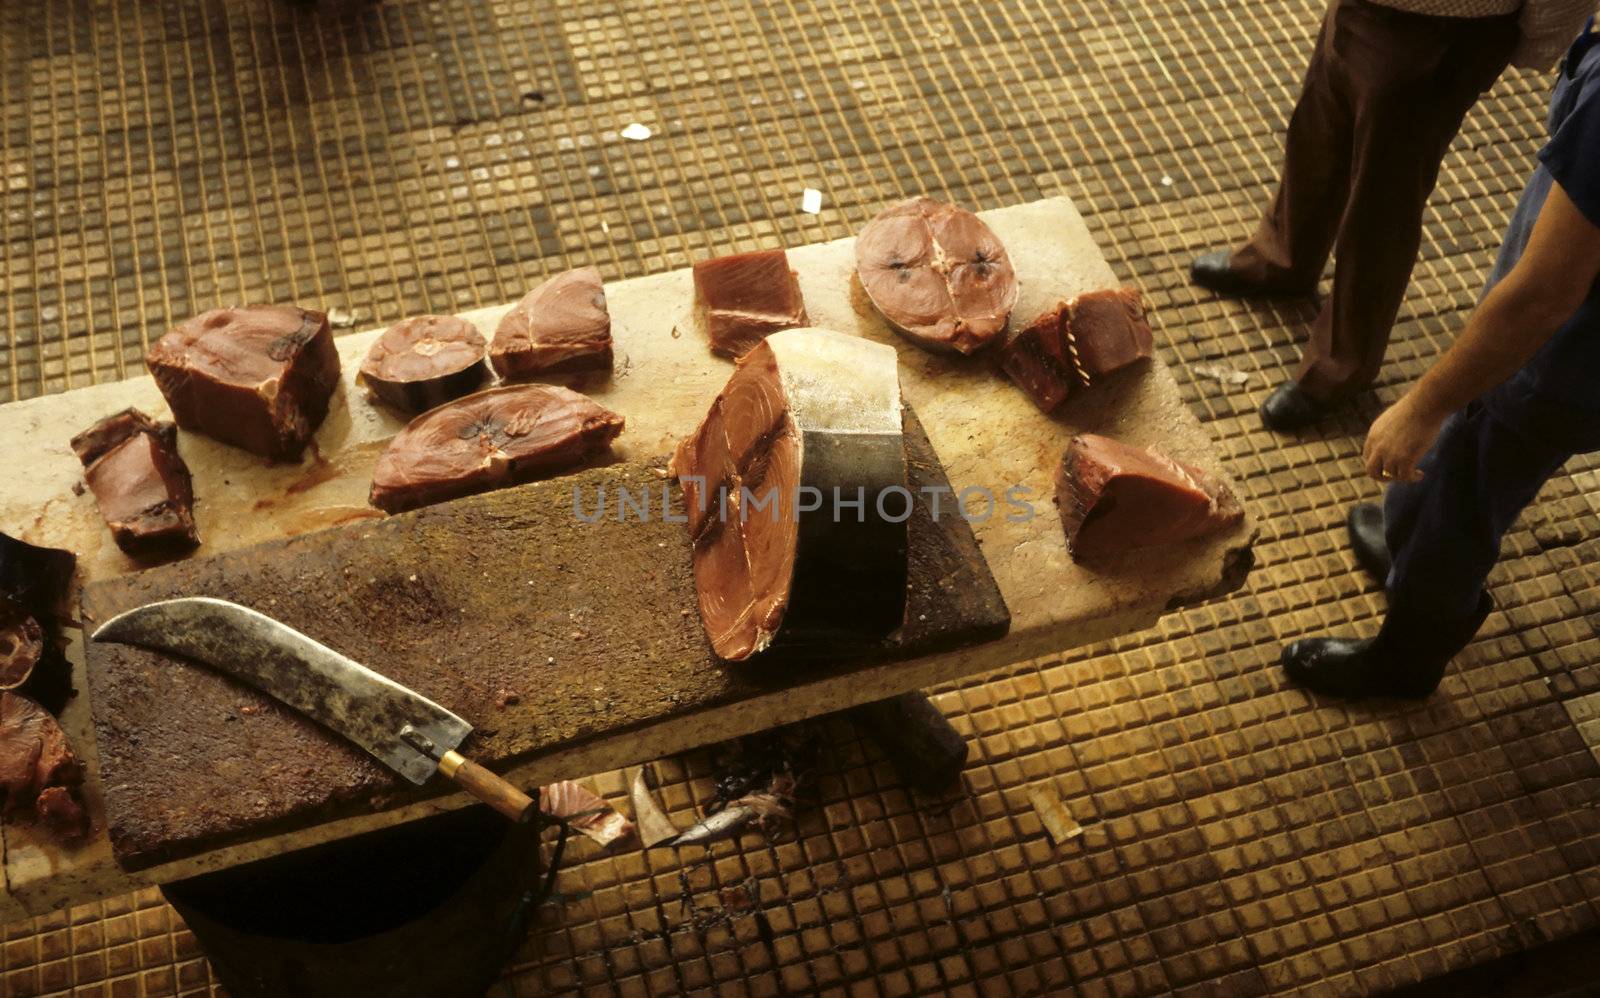 Slabs of fish on a wooden table in a fish market